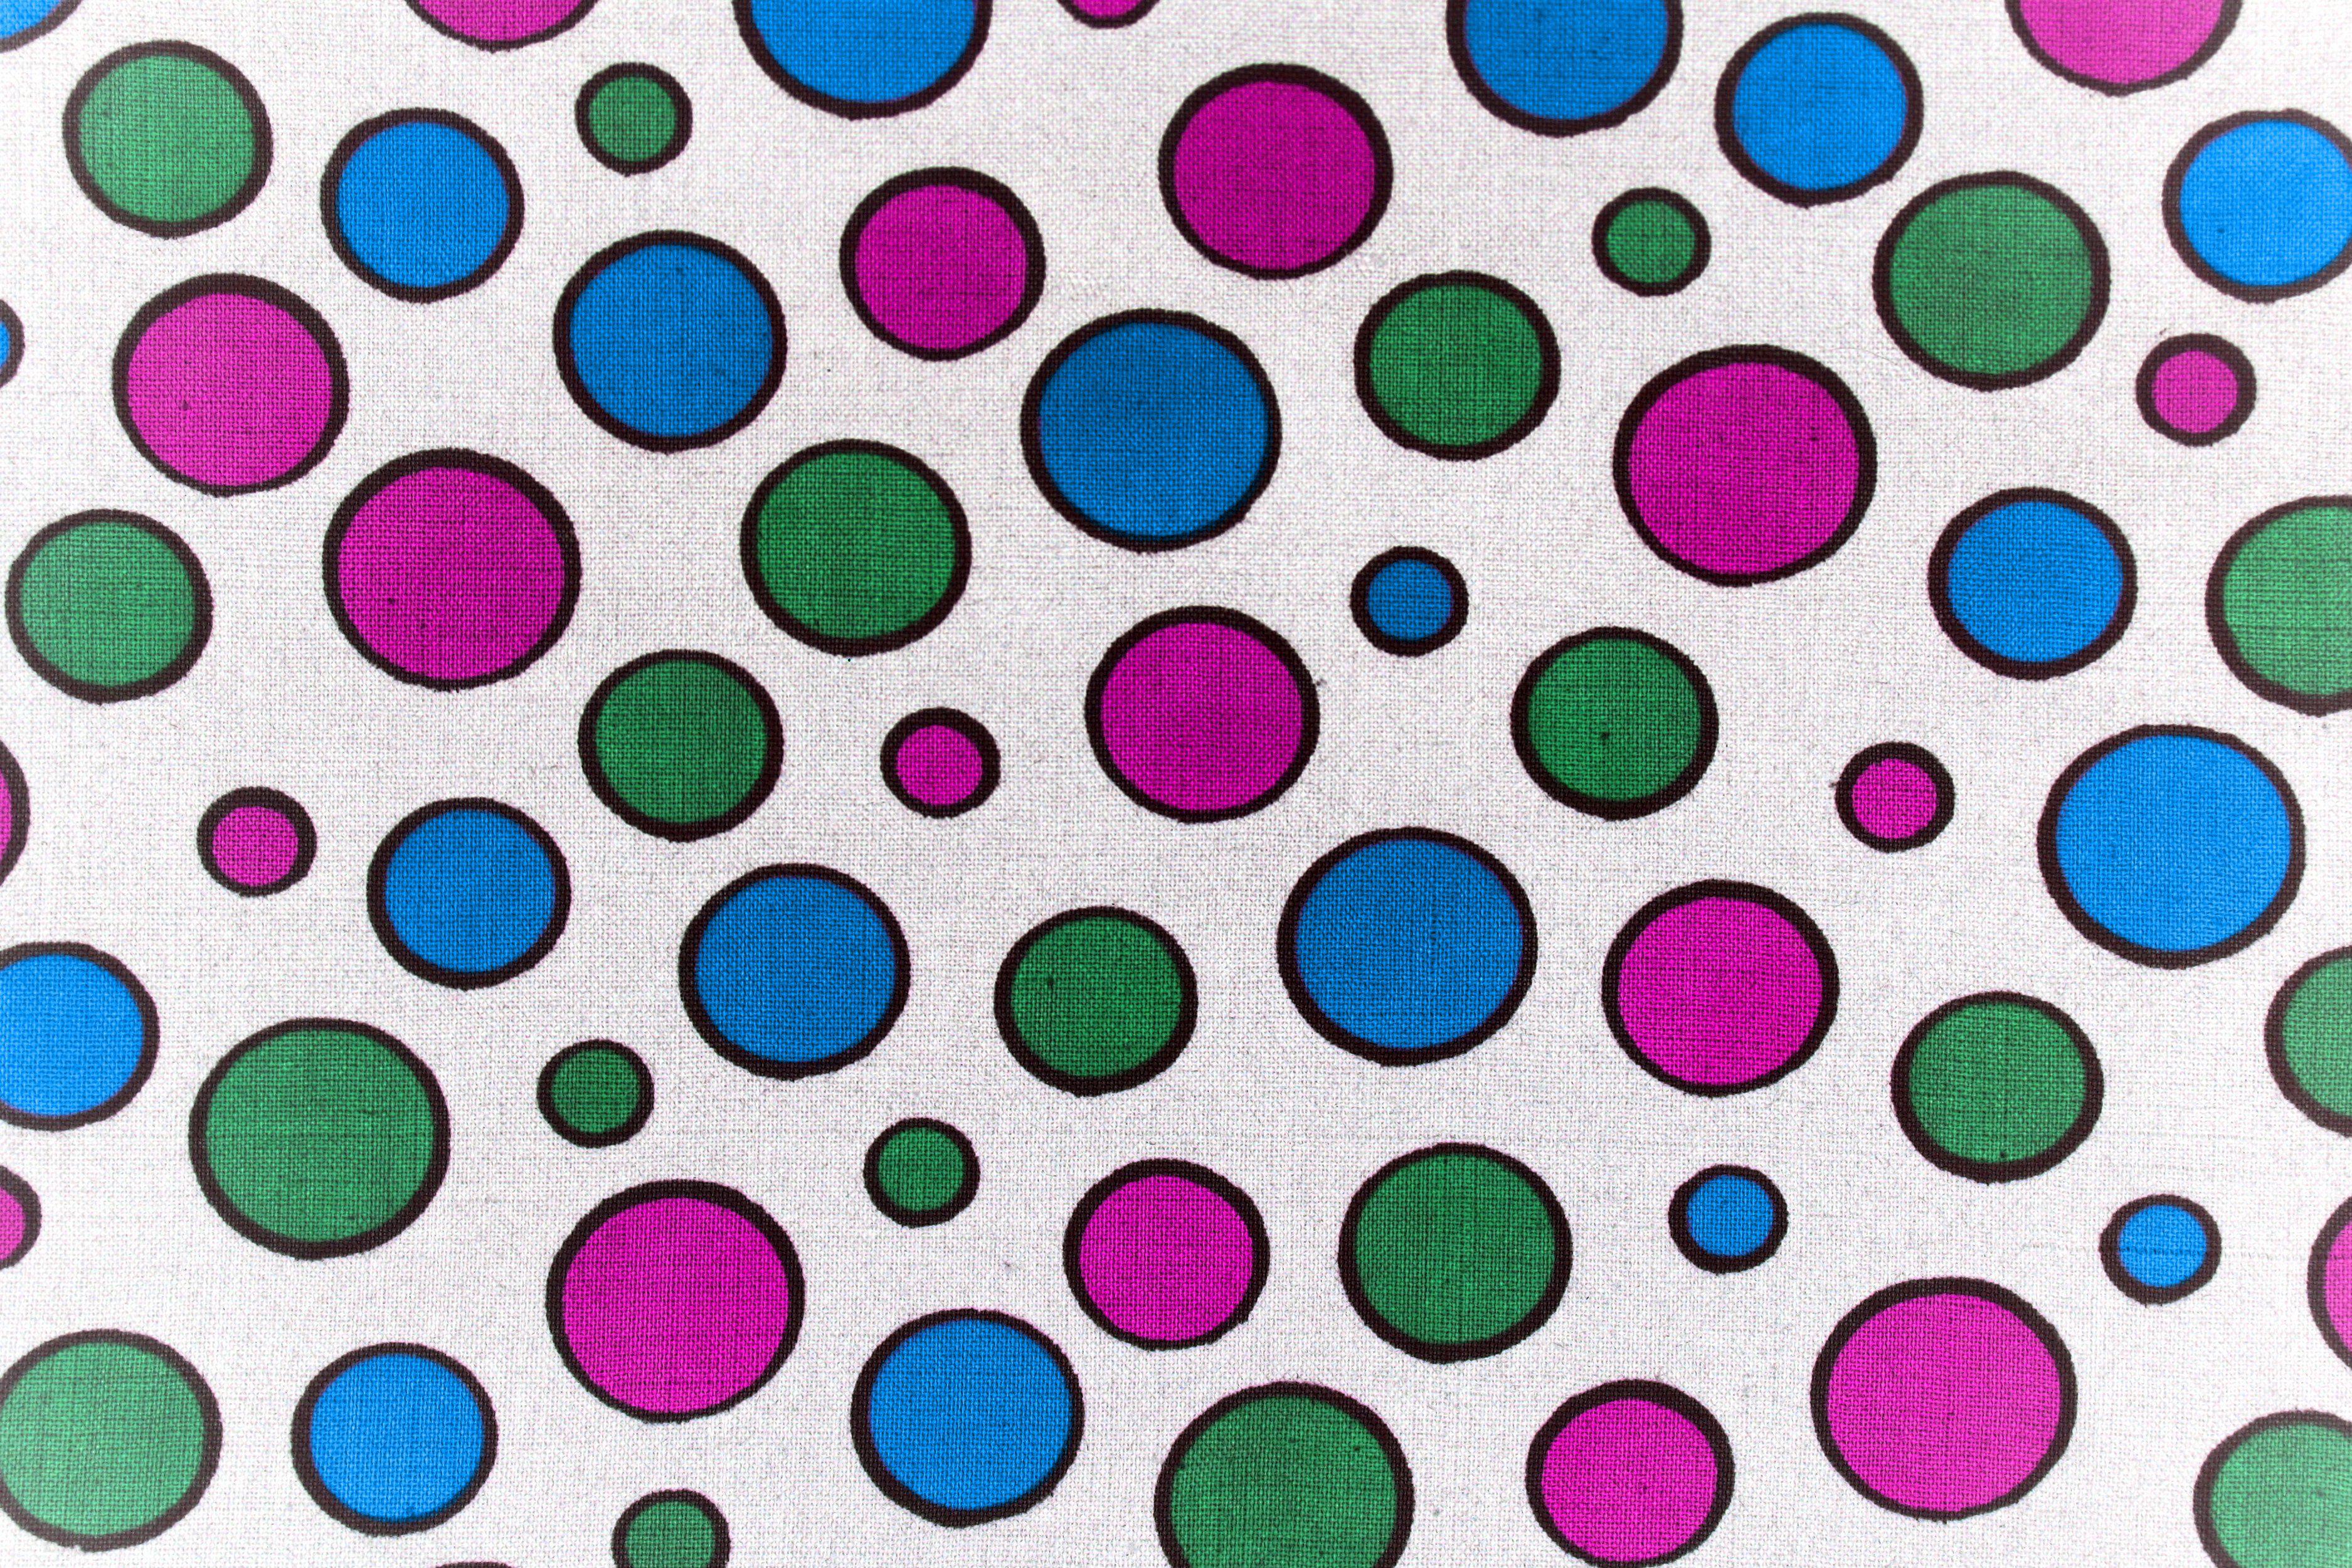 Blue and Pink Dot Logo - White Fabric with Pink, Green and Blue Dots Texture Picture | Free ...